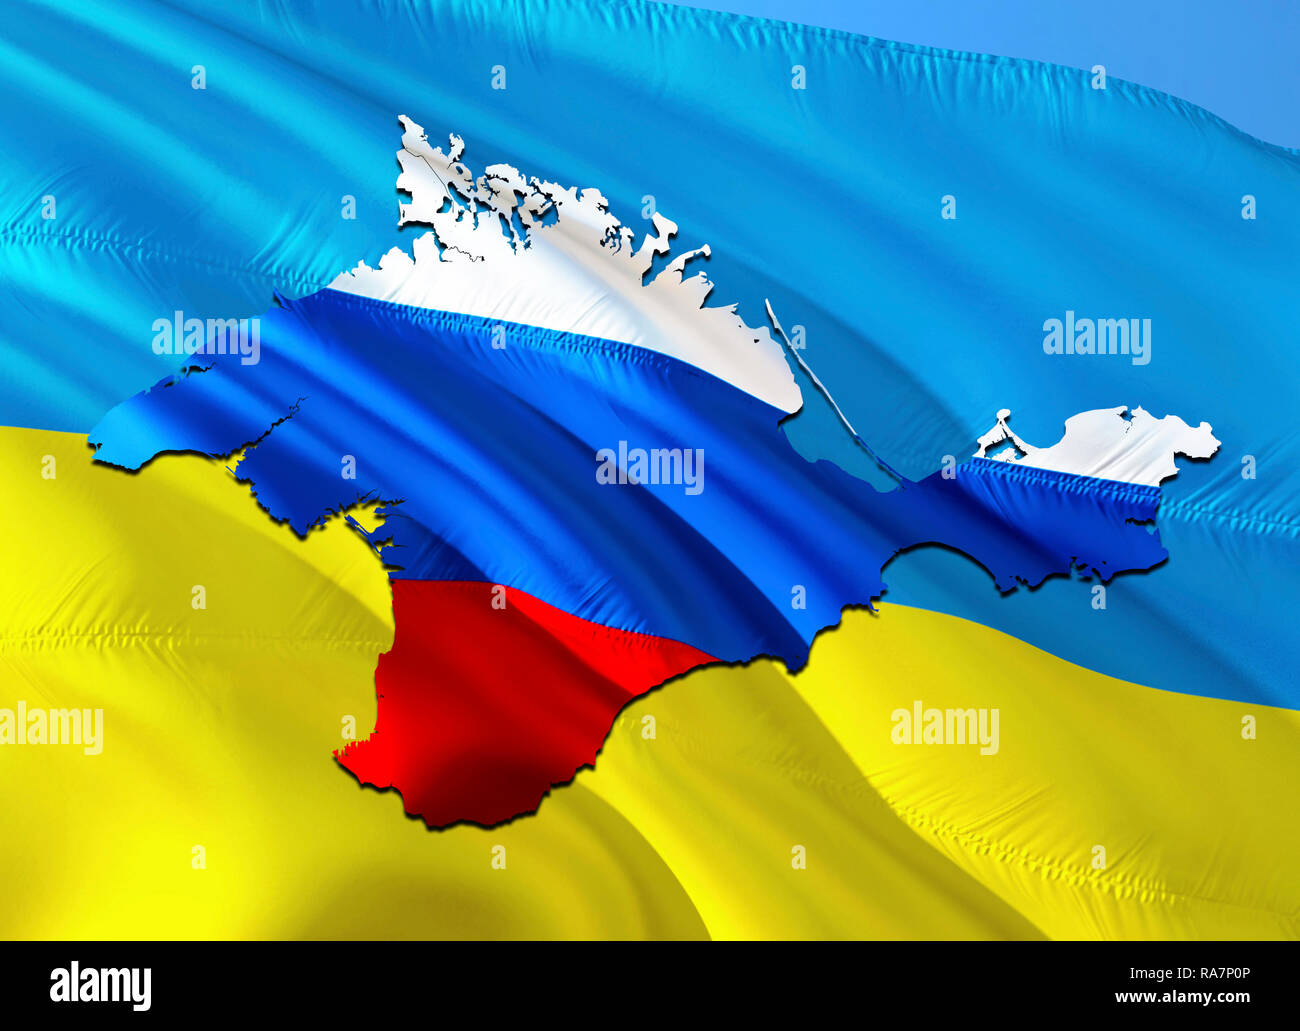 Russia Russian Flag Map with Crimea Car Trunk Boat Wall Decal